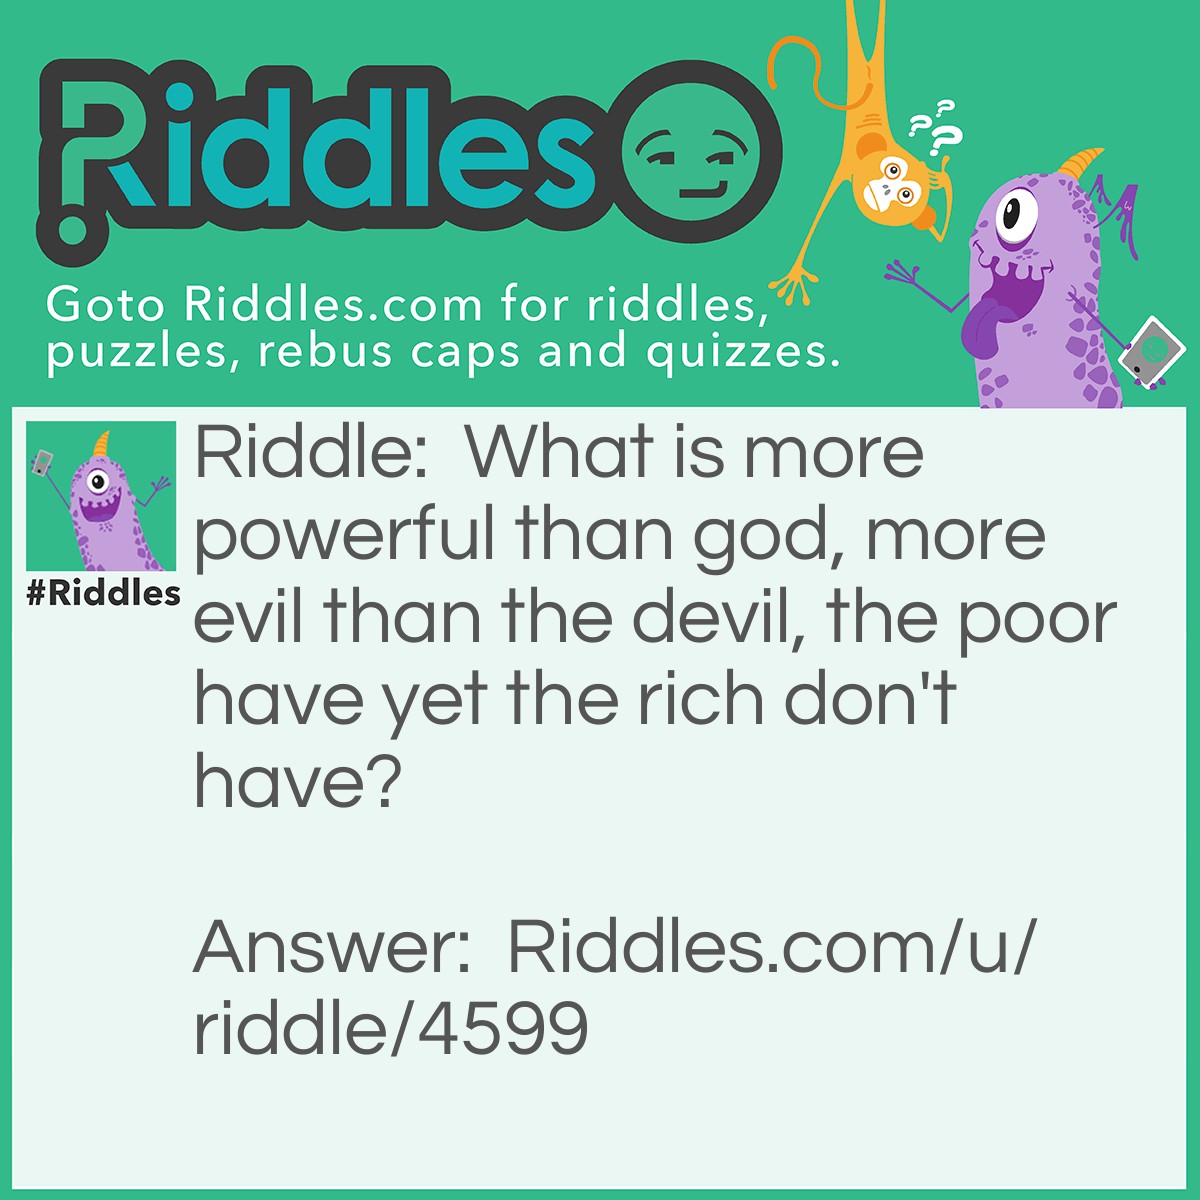 Riddle: What is more powerful than god, more evil than the devil, the poor have yet the rich don't have? Answer: Nothing.